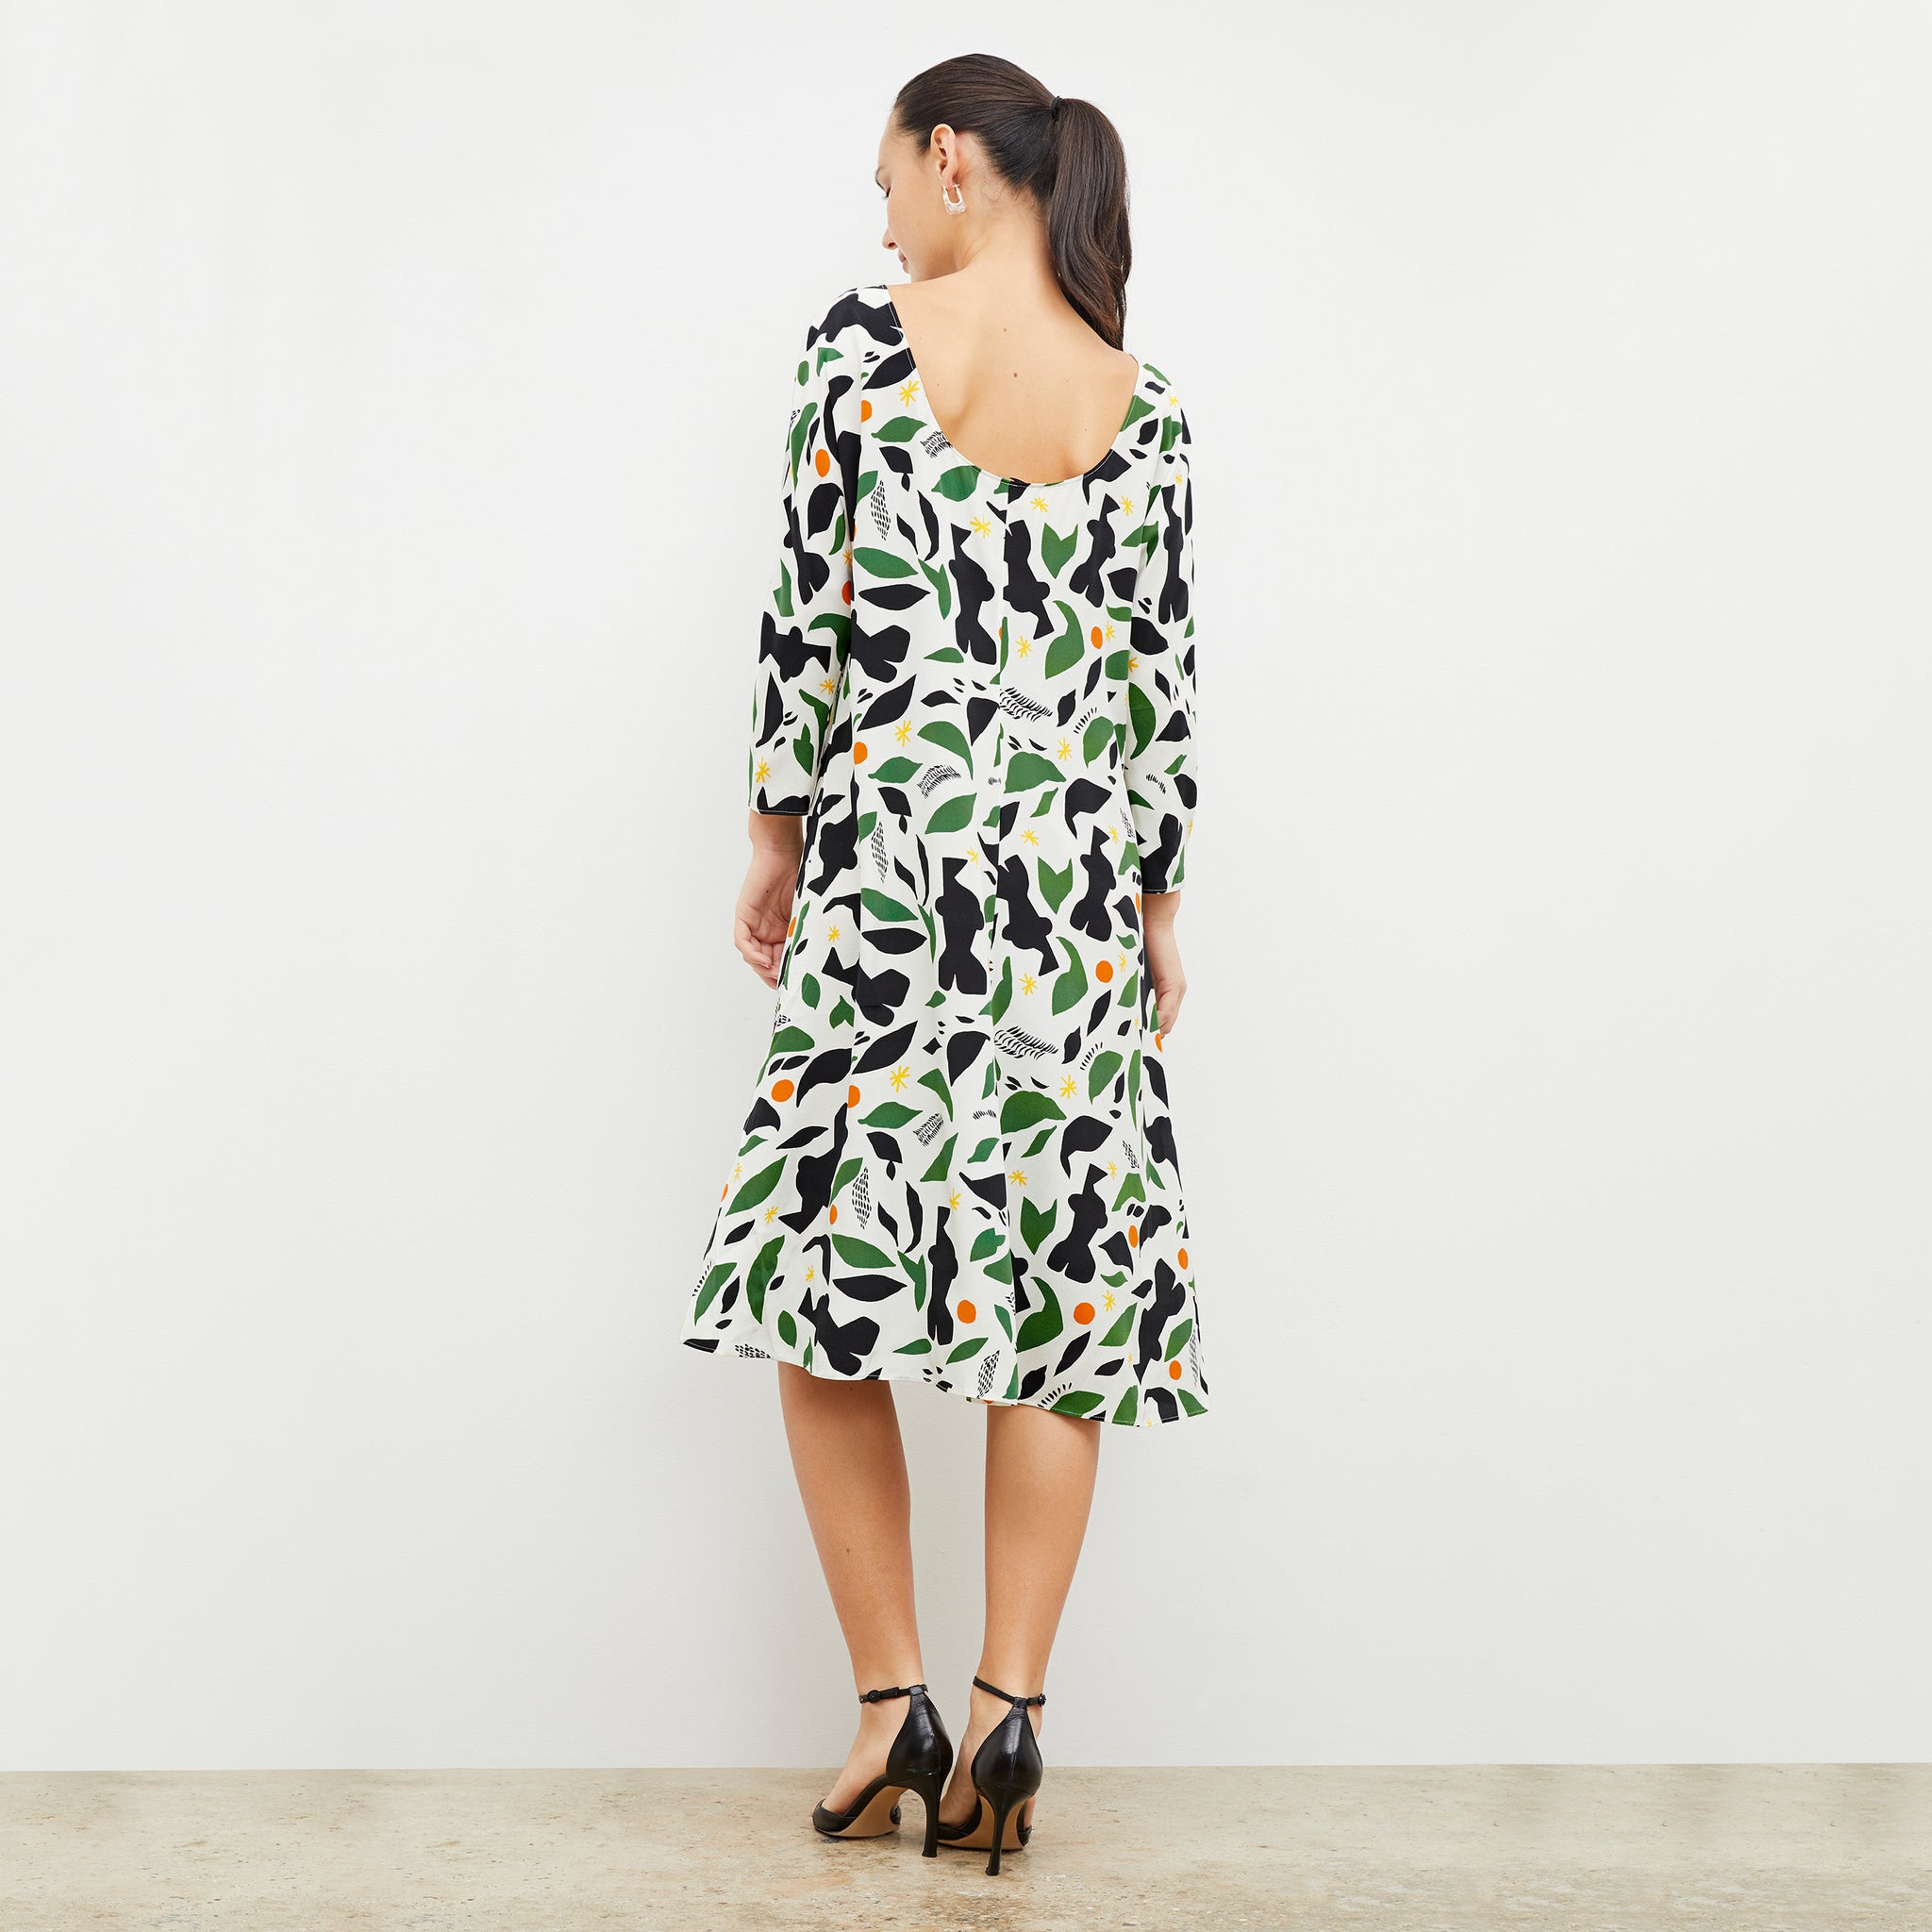 Back image of woman wearing the alesia dress in icon print